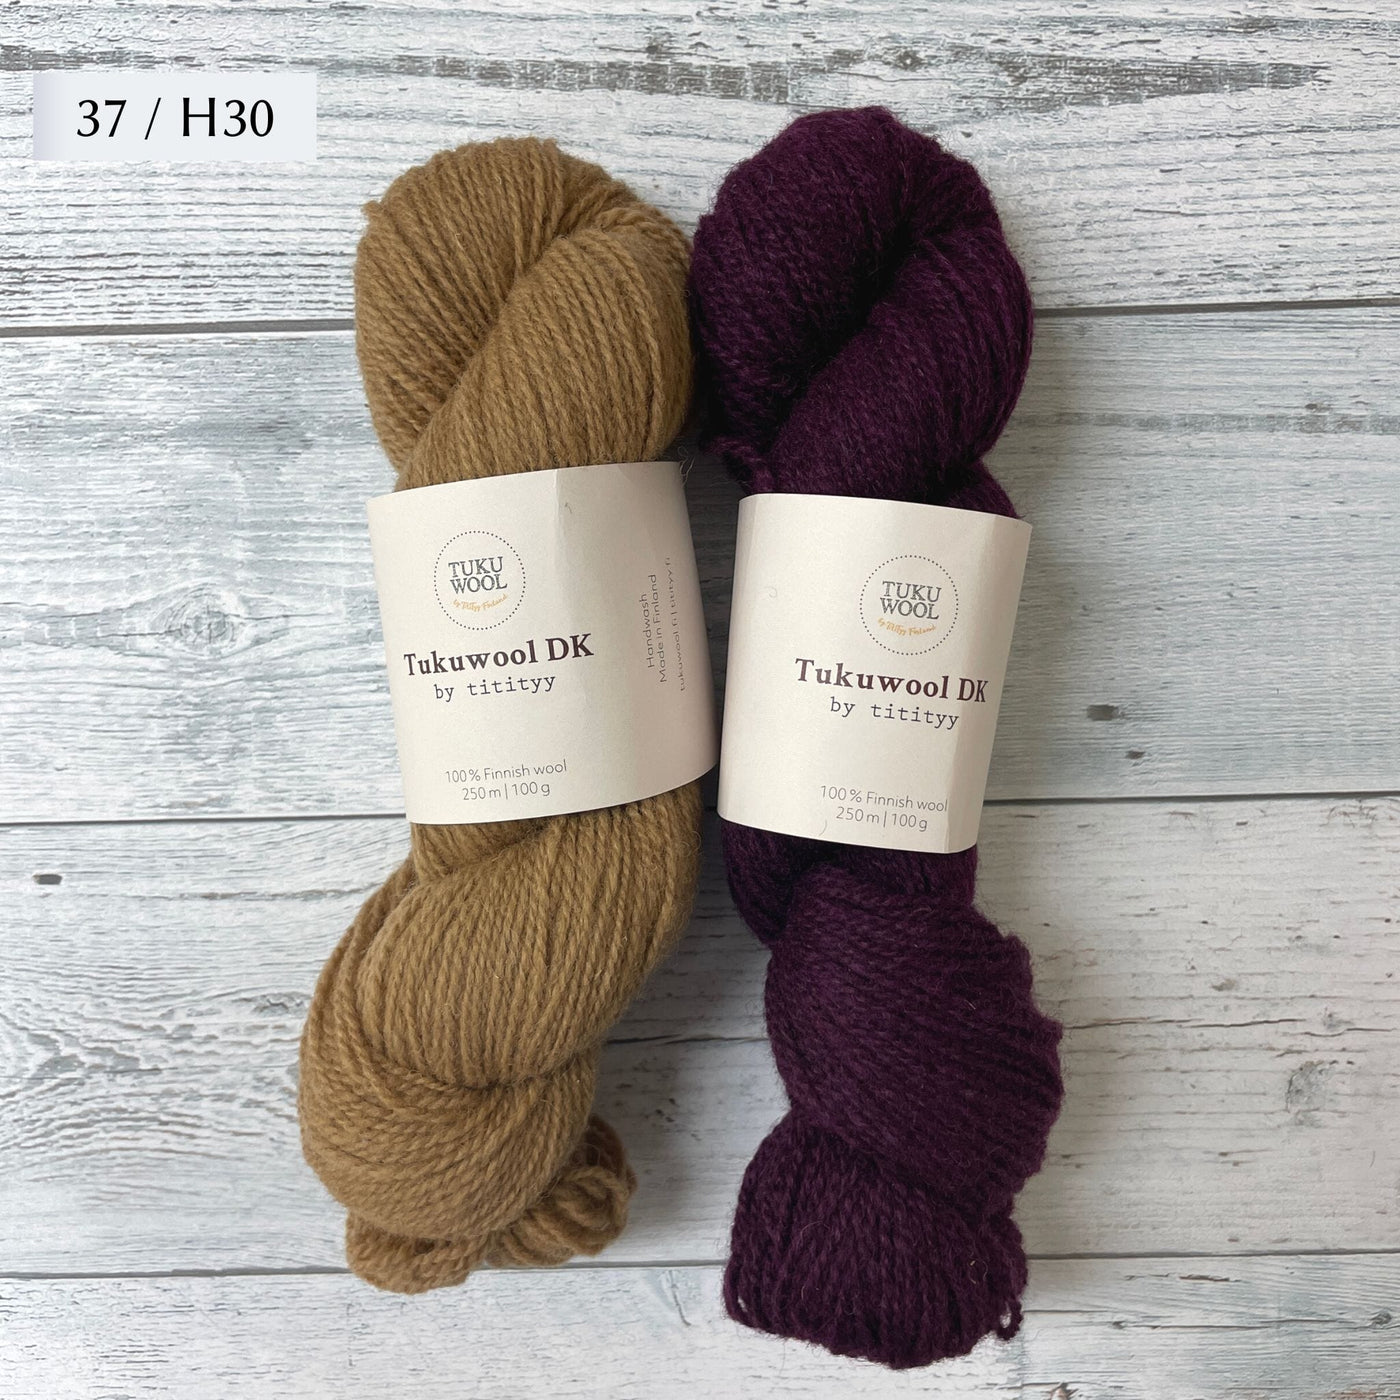 Two Skeins of Tukuwool DK shown as a colorway option for the Muisto Hat & Mittens Set. 37 (tan) and H30 (heathered deep purple.)